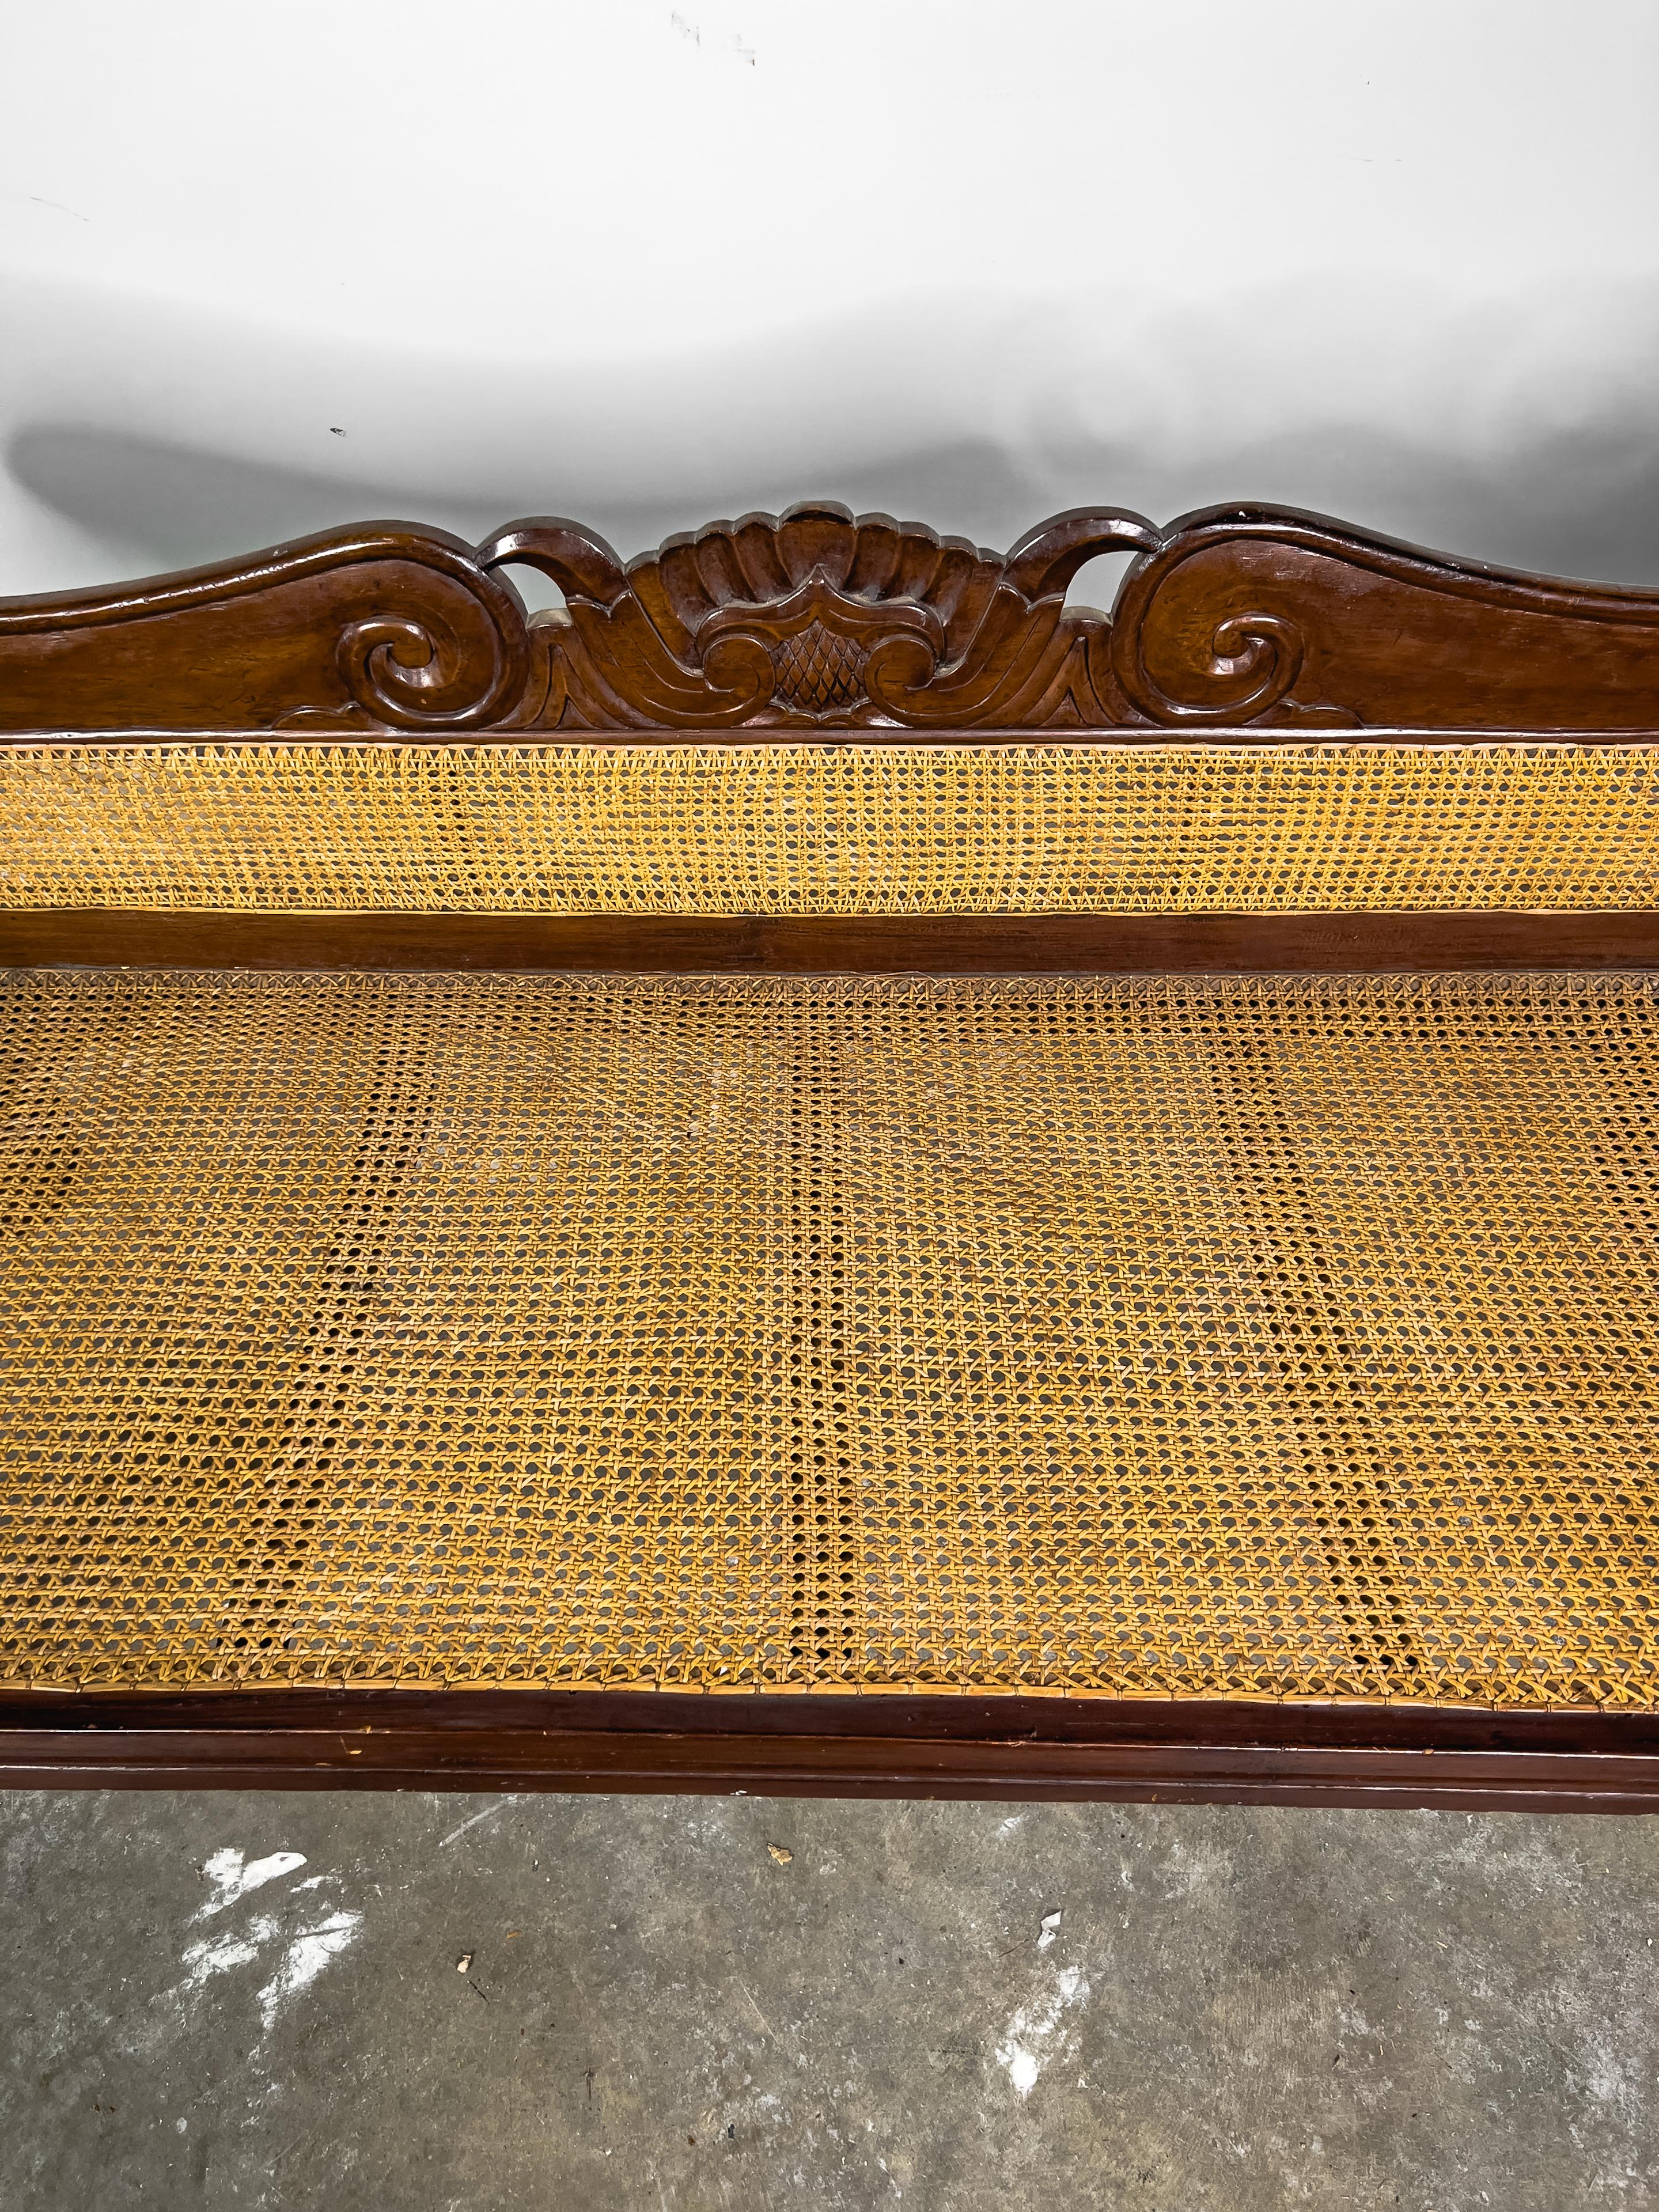 Vintage Rosewood and caned Indonesian Dutch Colonial style settee/sofa.  We were told by the family of the owner that this was a prized possession of their mother.  The children were not allowed anywhere near to the settee.  This is obvious in that